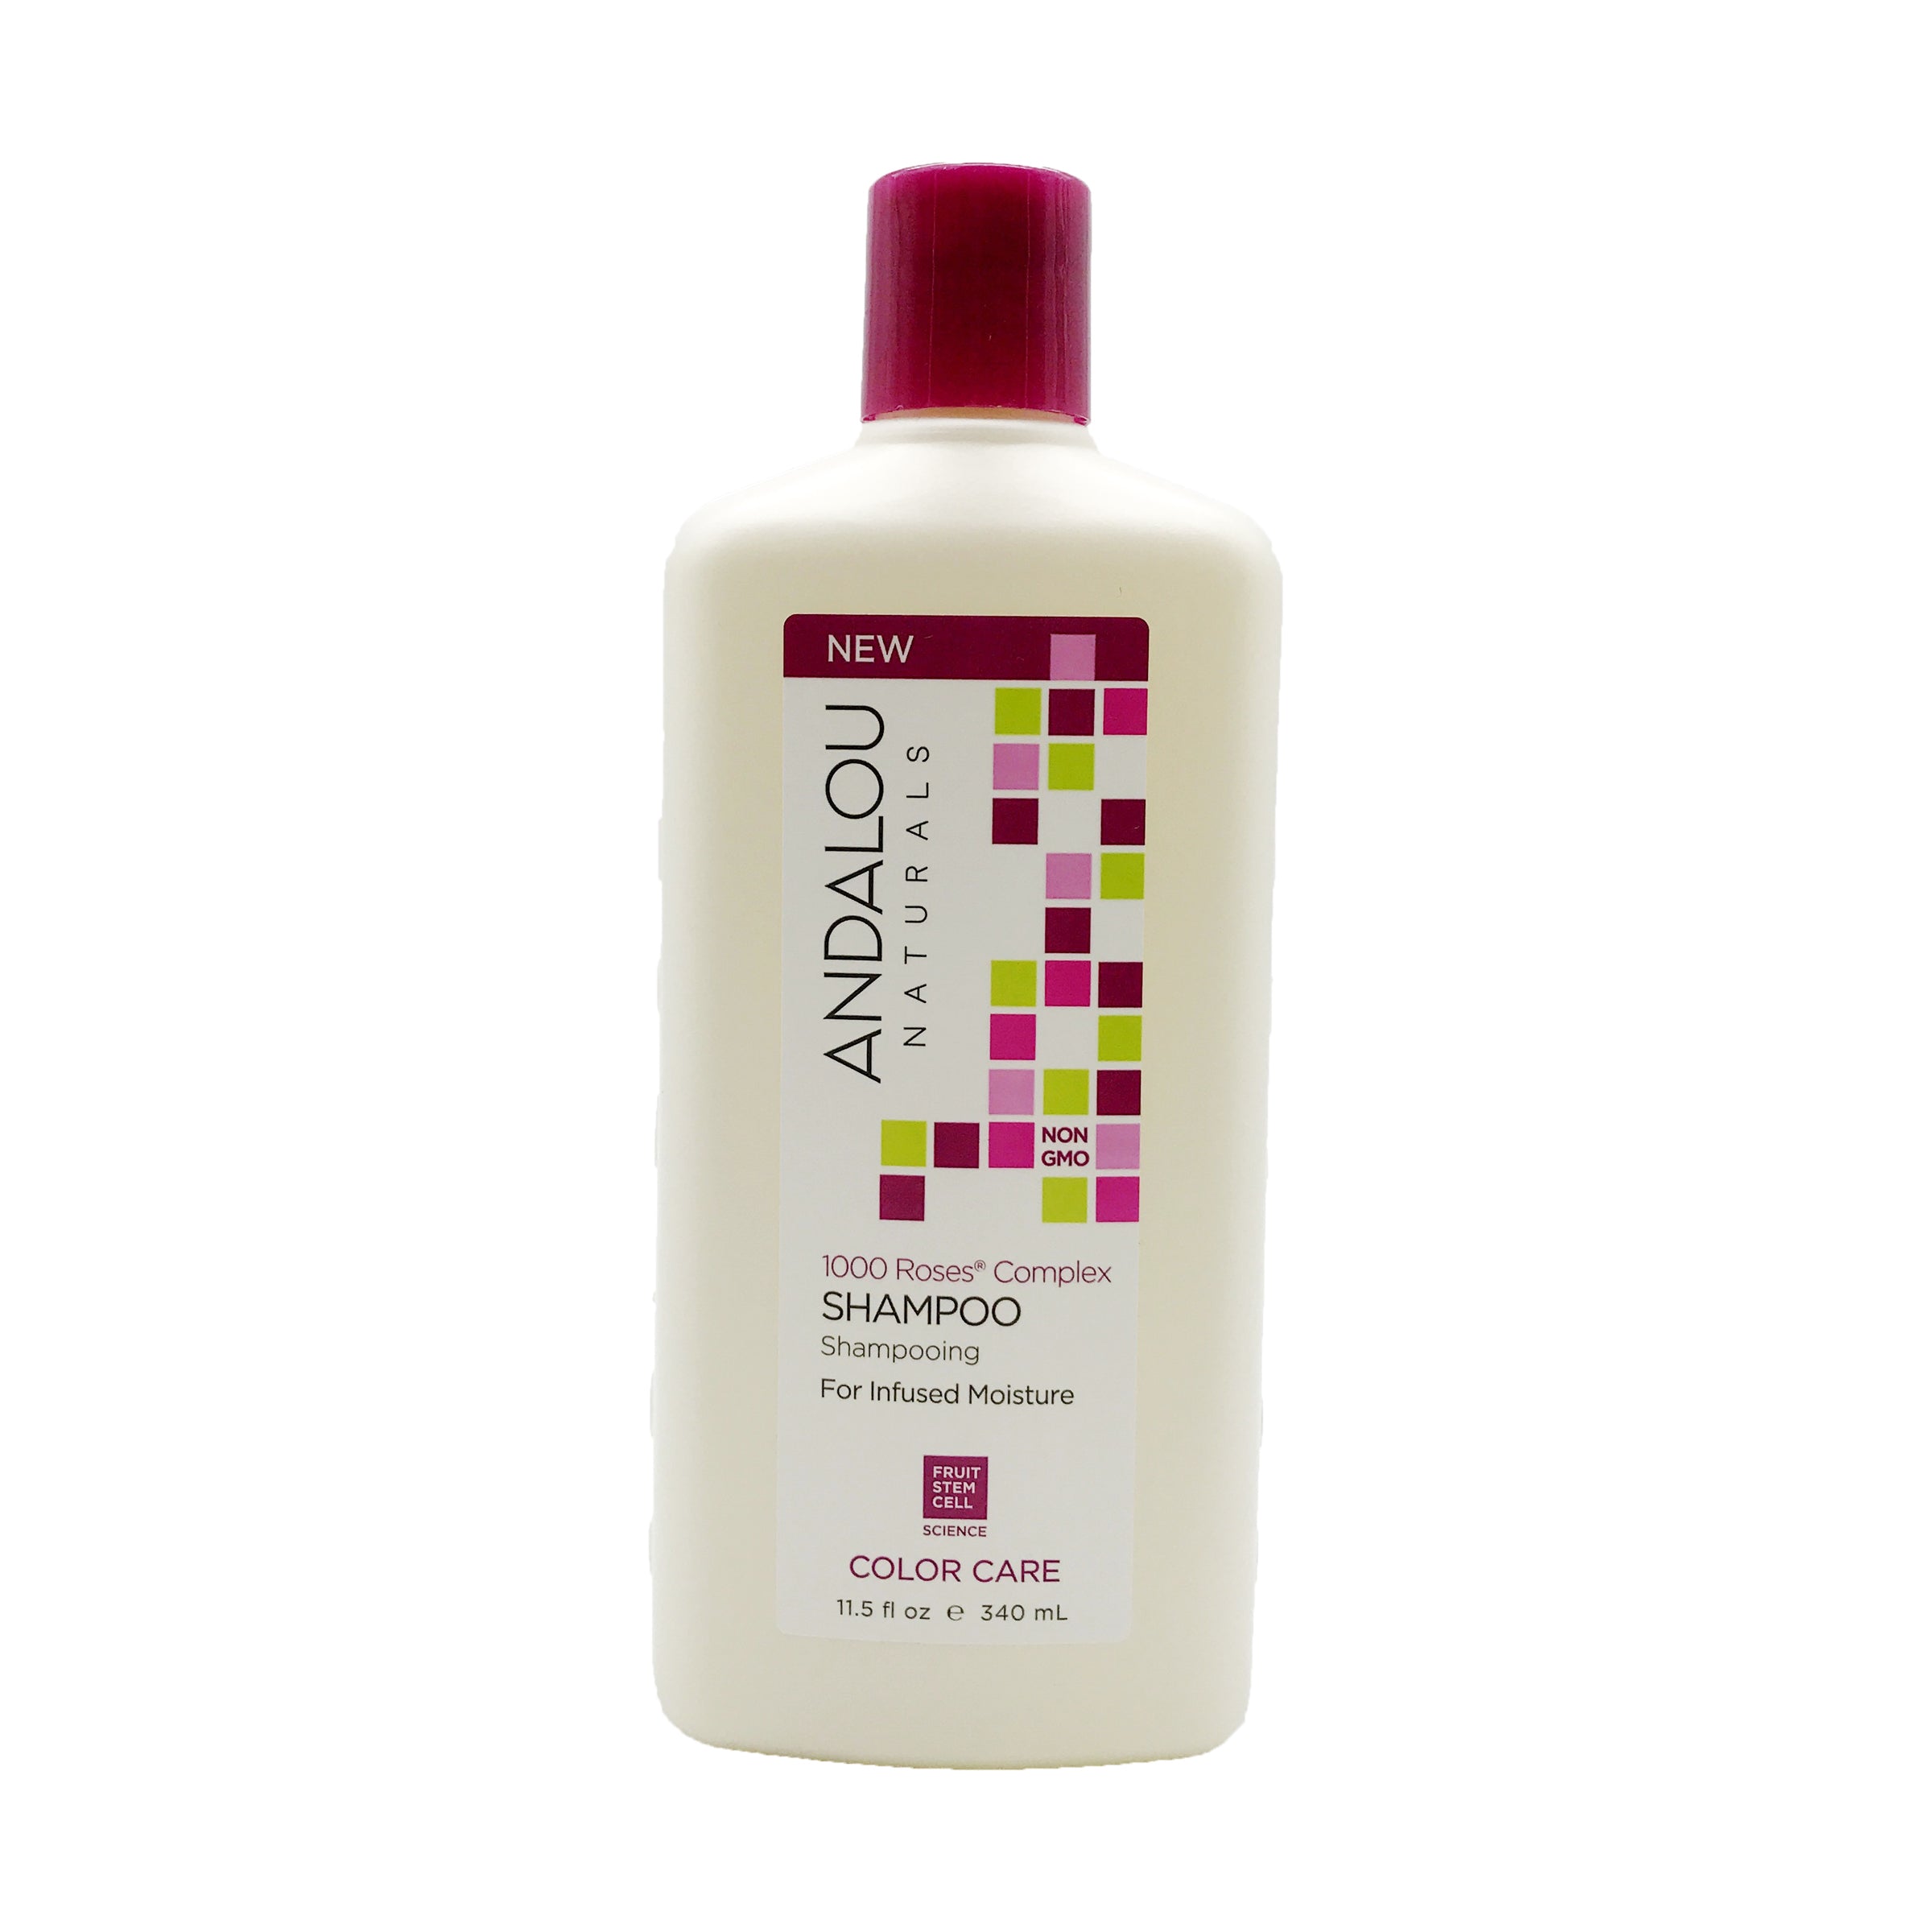 Shampooing aux 1000 roses - Andalou Naturals